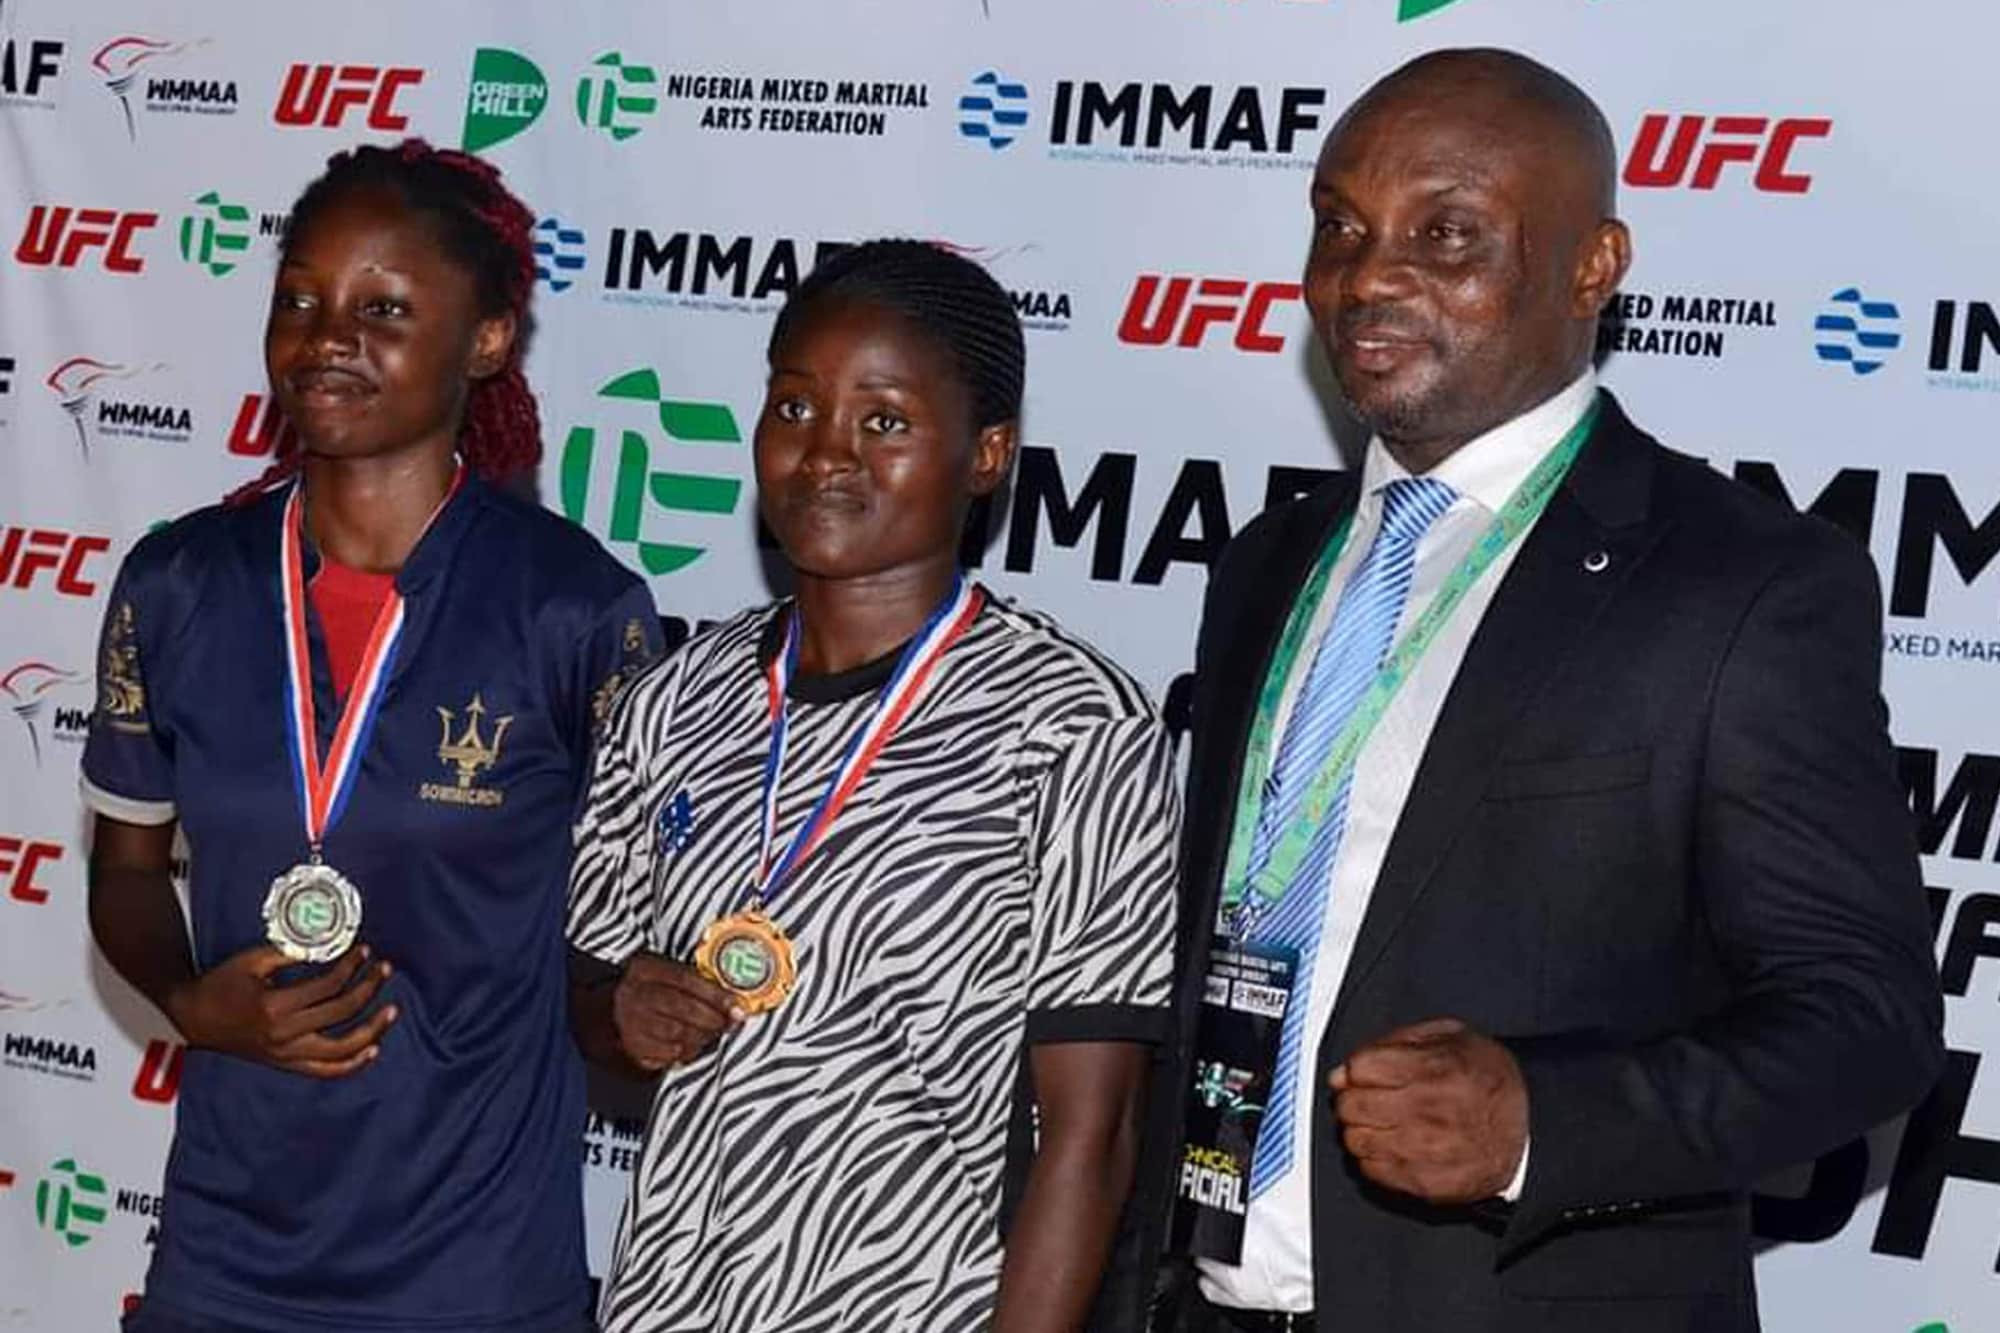 Nigeria's MMA leaders are to highlight the sport at the National Festival of Sport ©IMMAF